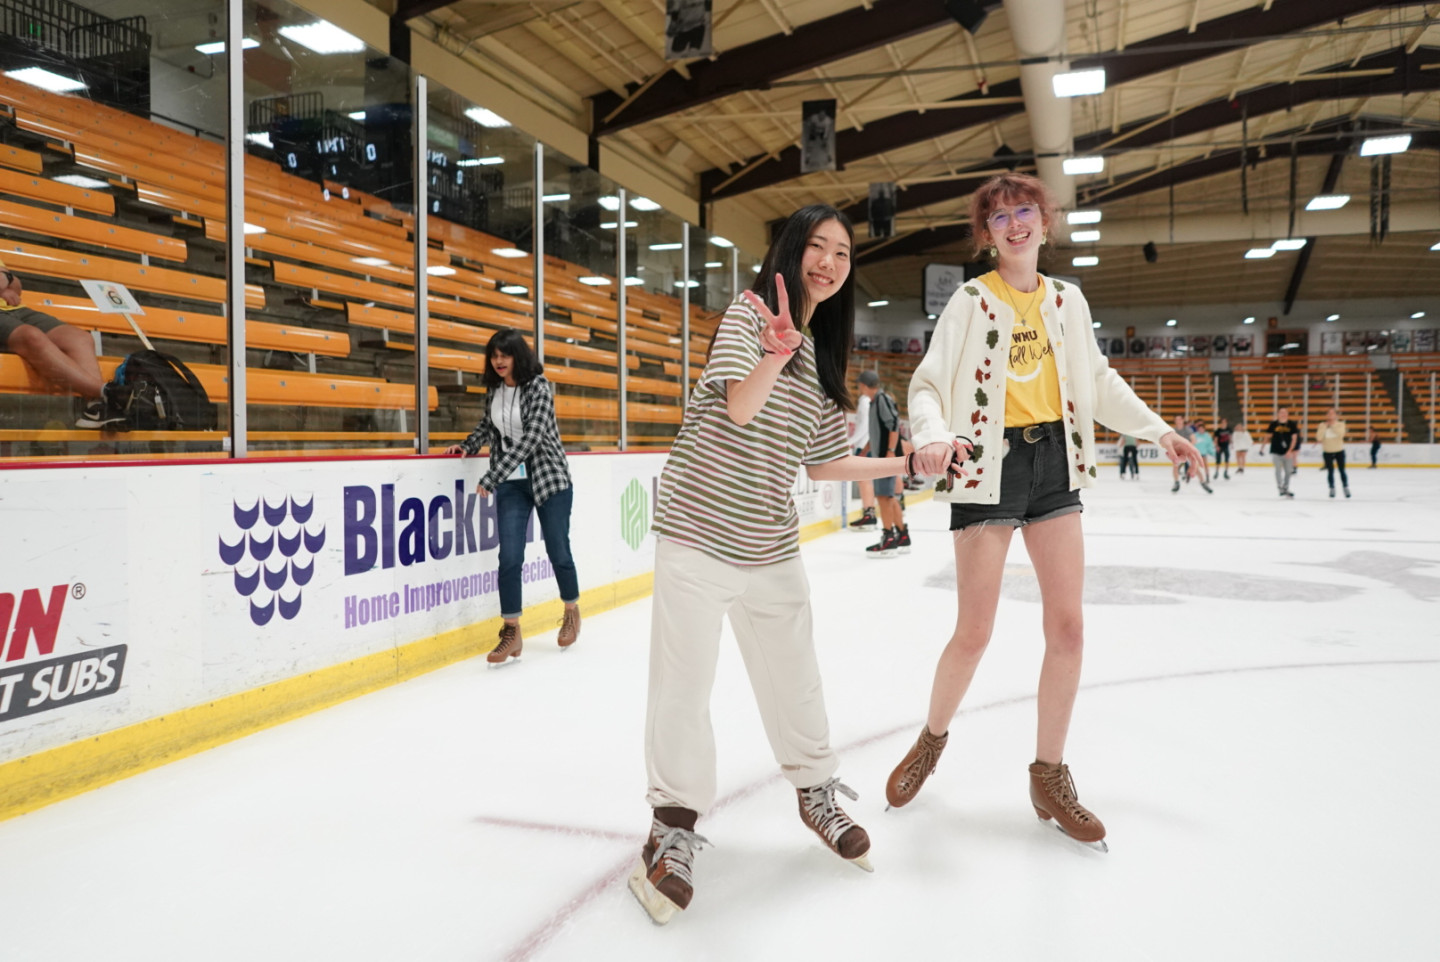 Students ice skate.